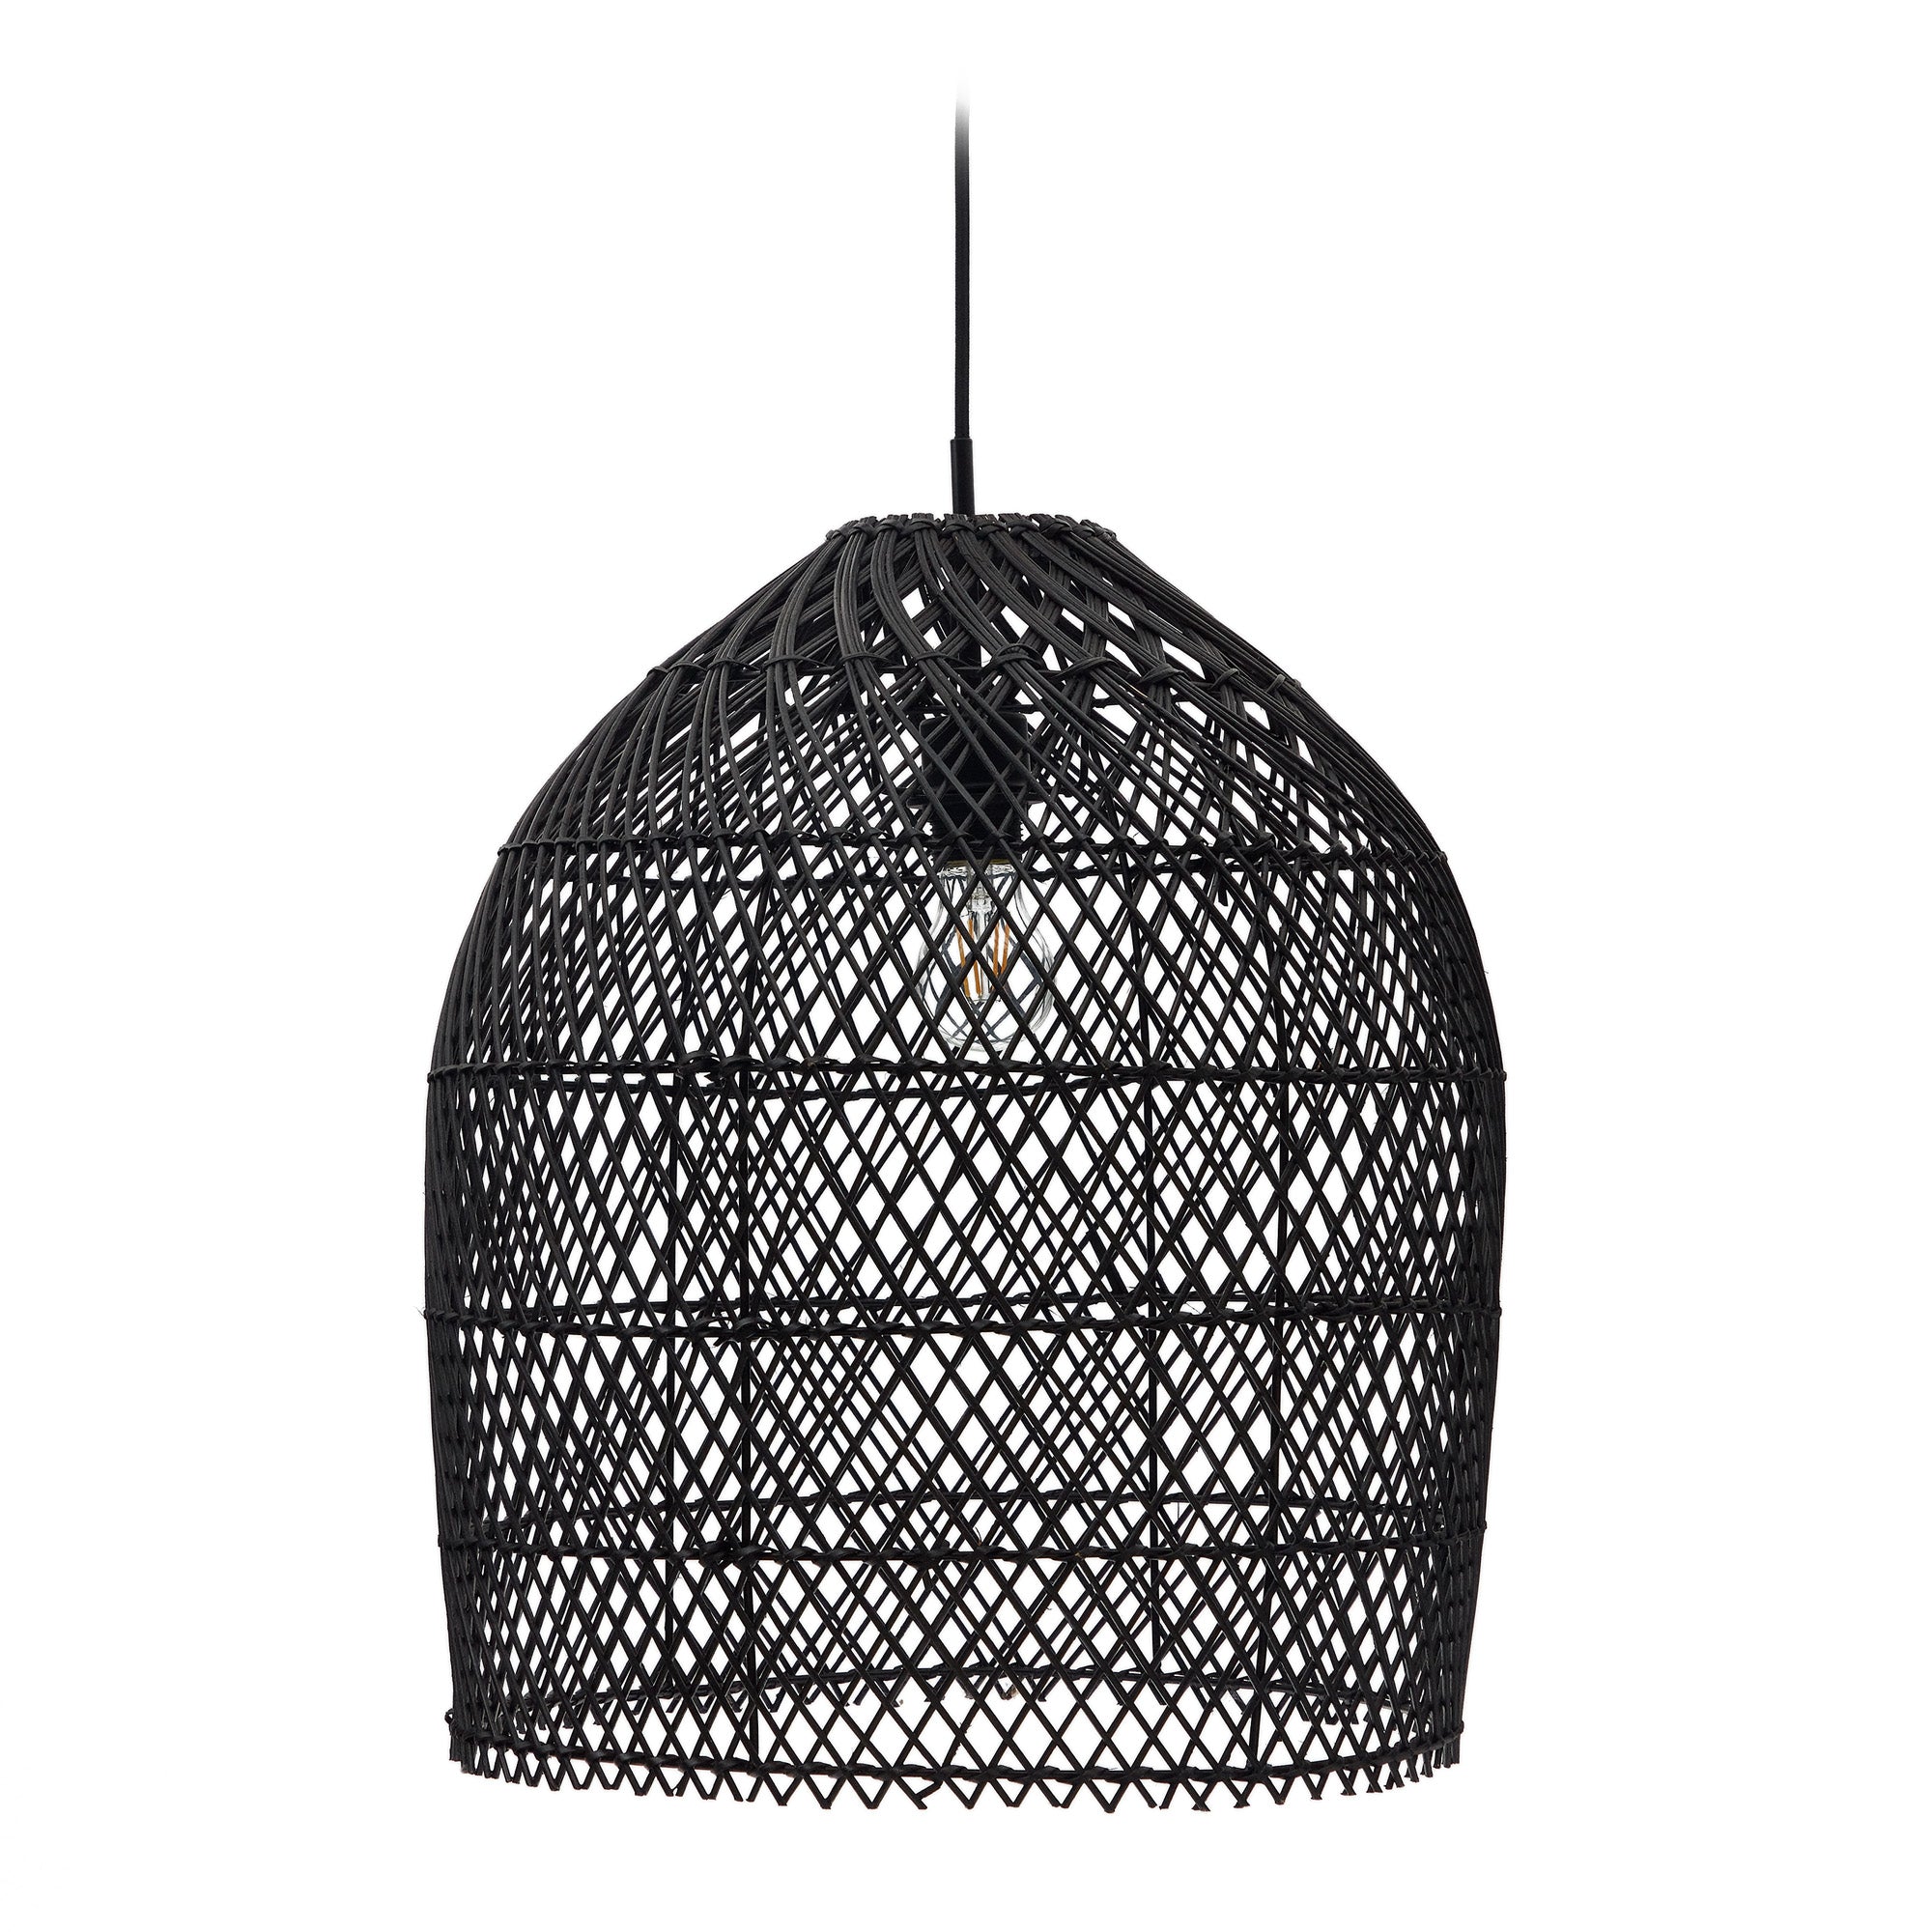 Domitila rattan ceiling lamp shade with black painted finish, Ø 44 cm